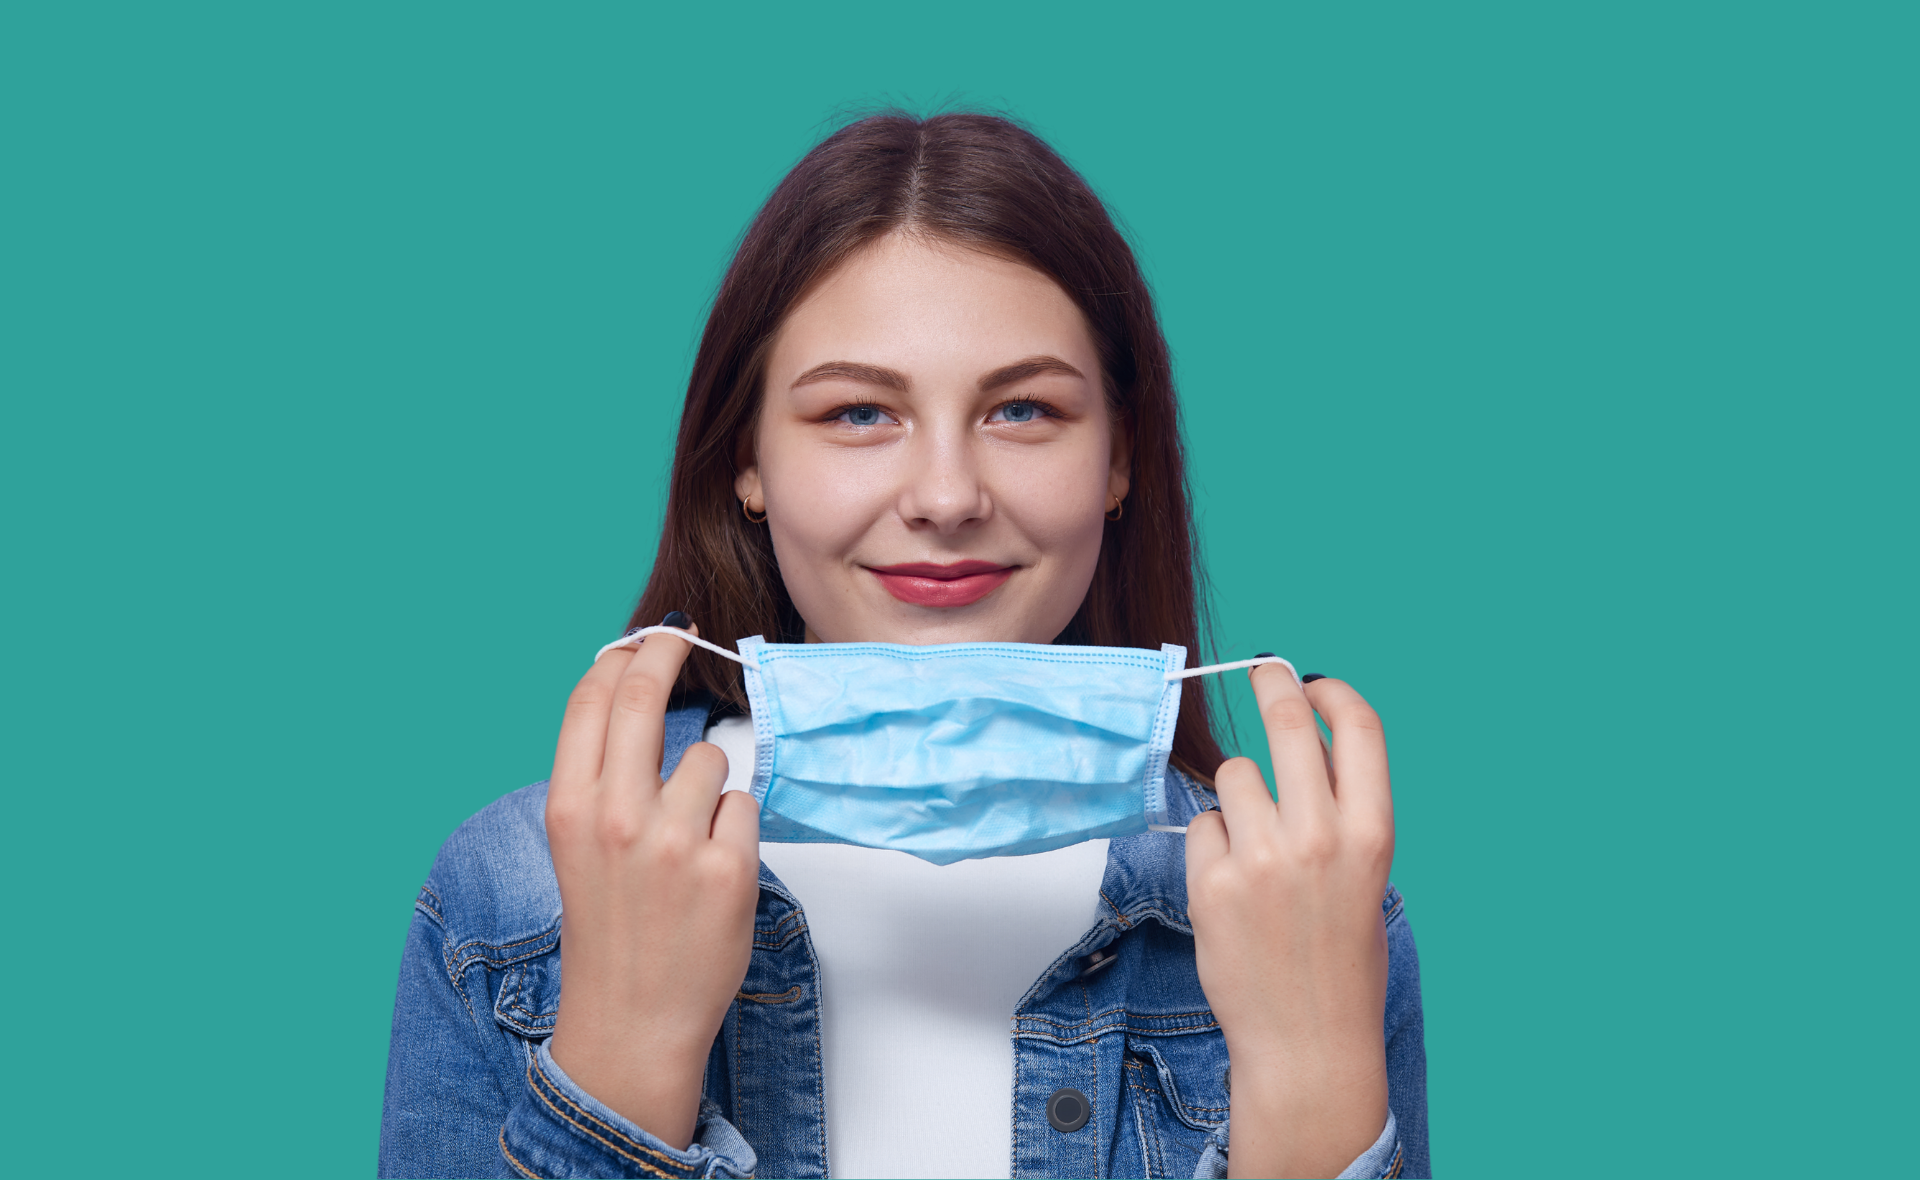 A young woman holding a face mask, smiling and looking at the camera. She wears a denim jacket, isolated on a turquoise background, promoting Spokane Transit's health safety initiatives.